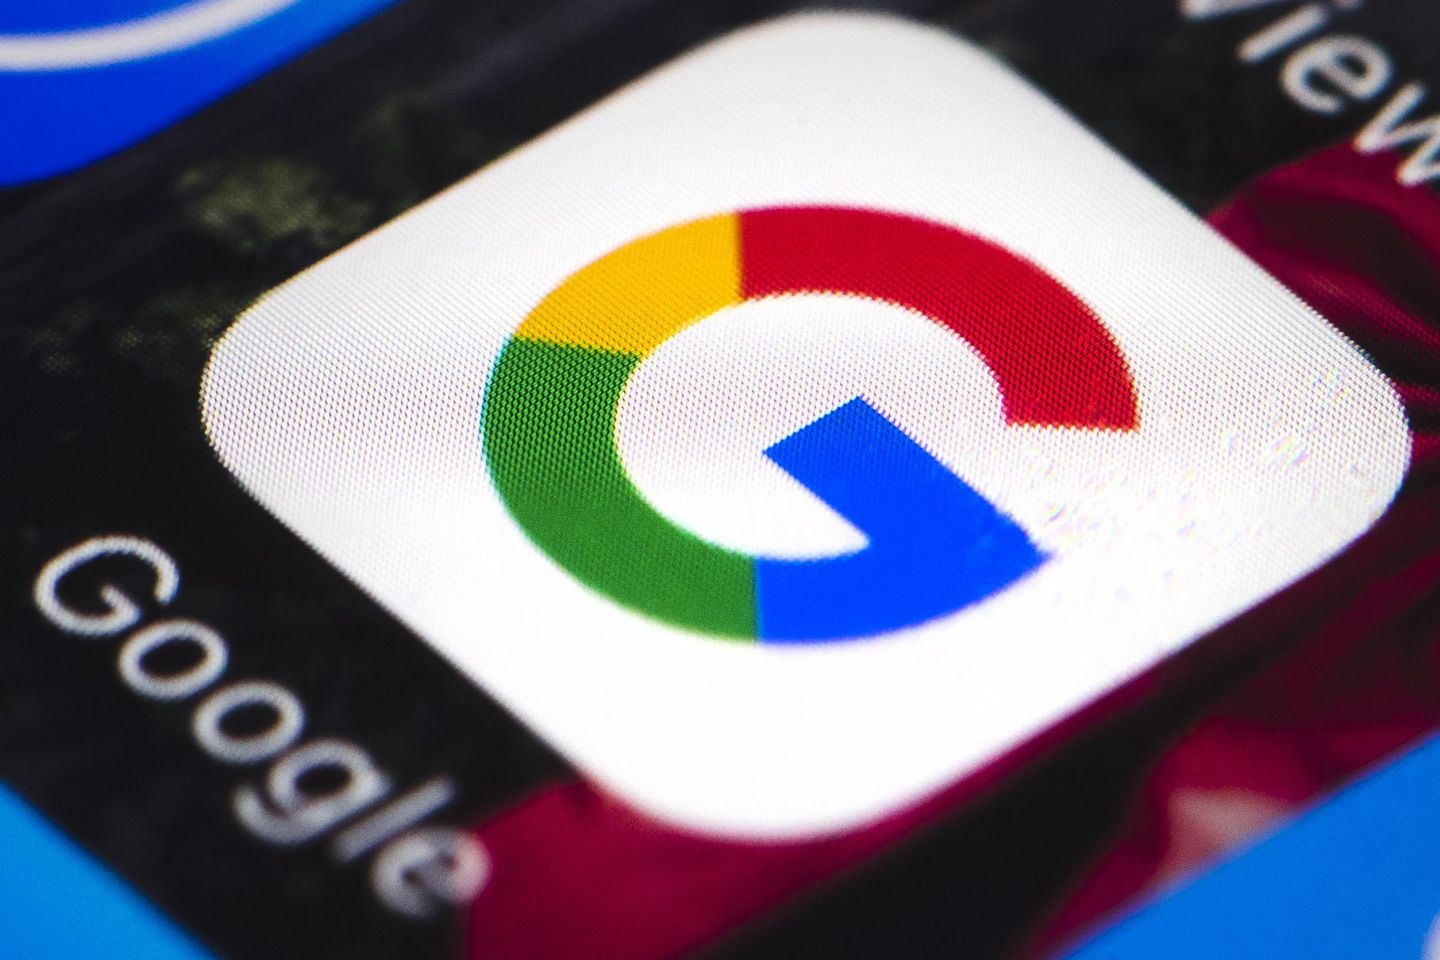 Republicans say Google spam filter cost them $2 billion from donors